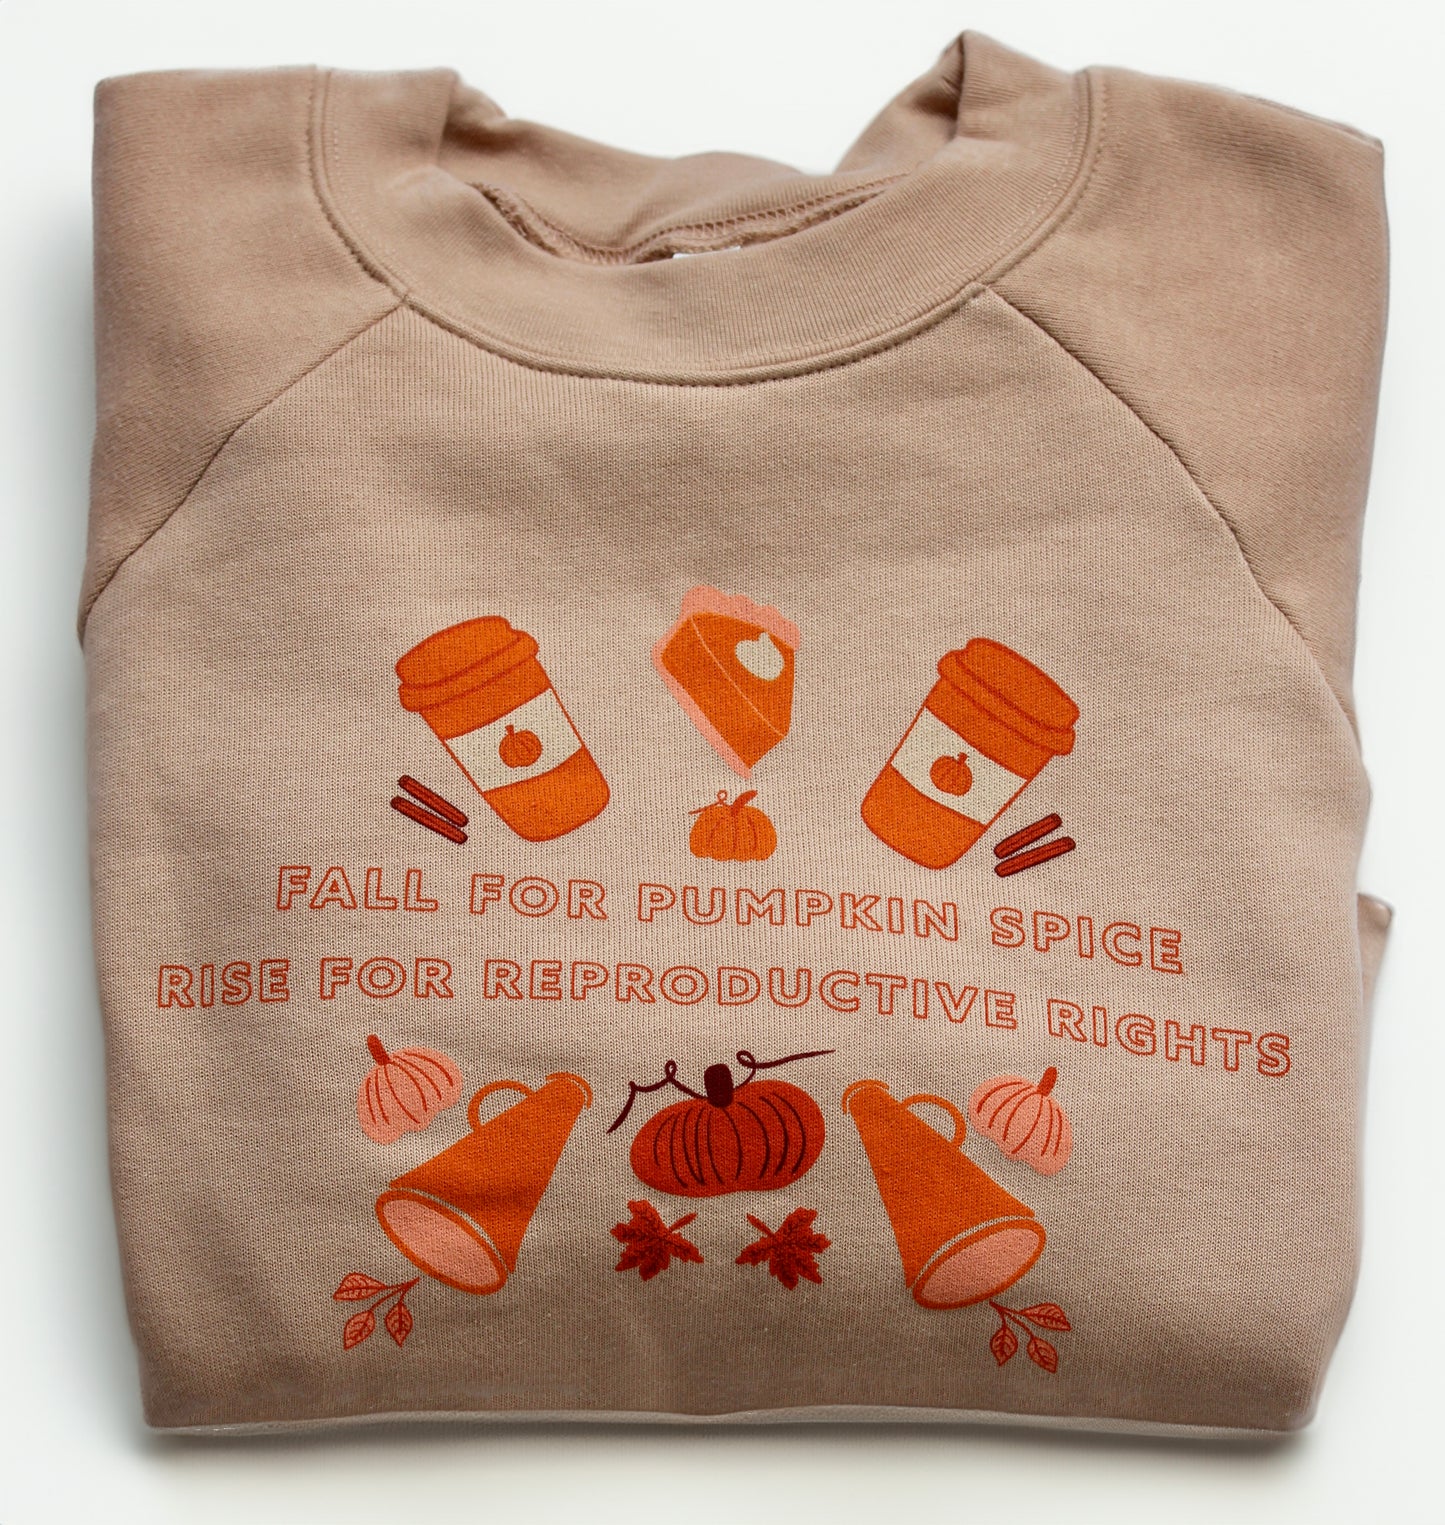 Pumpkin Spice and Reproductive Rights Women's Sweatshirt